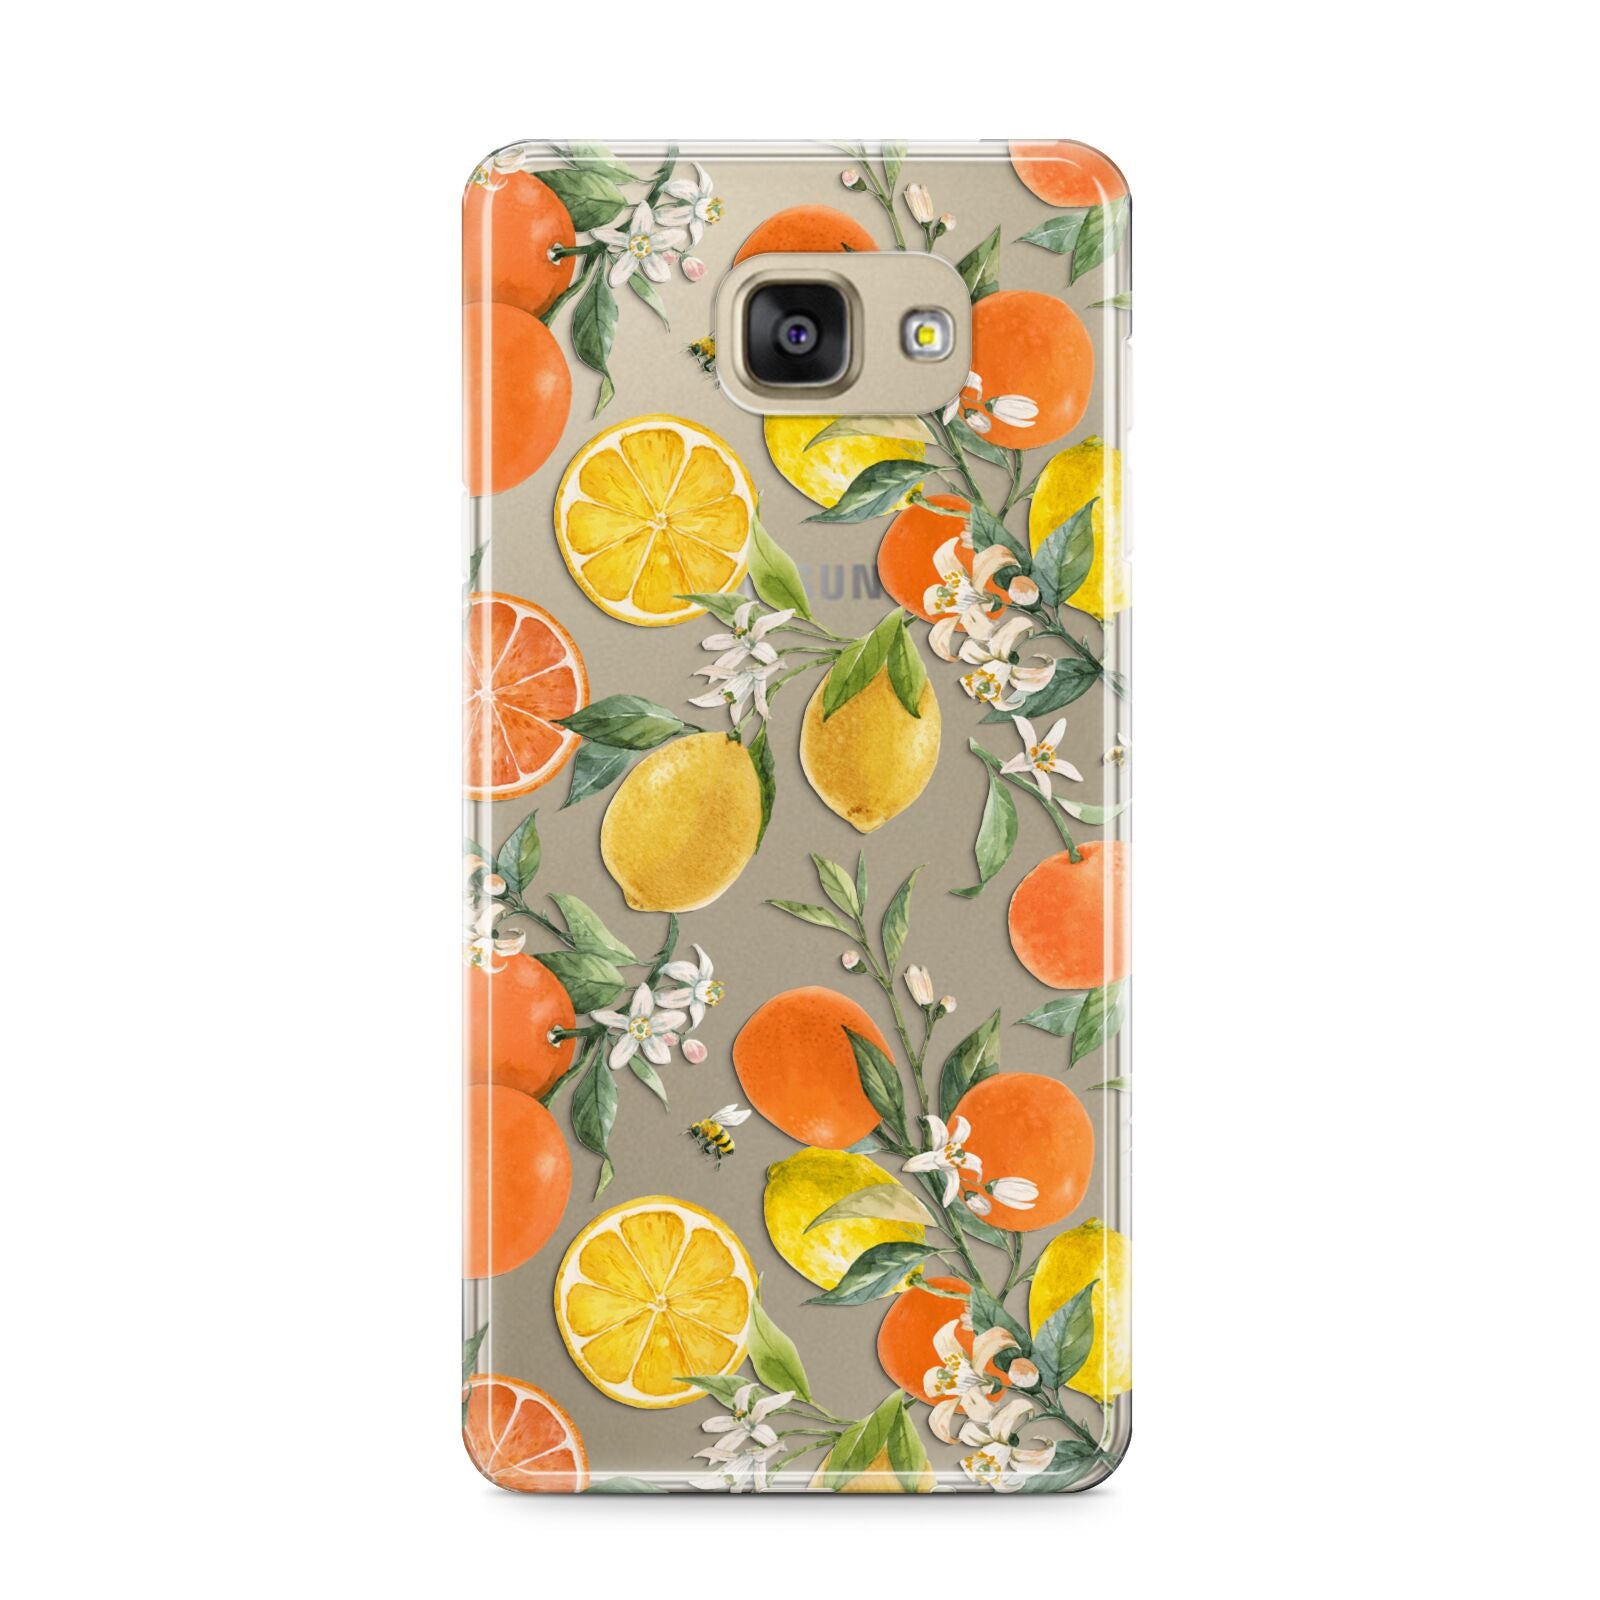 Lemons and Oranges Samsung Galaxy A9 2016 Case on gold phone